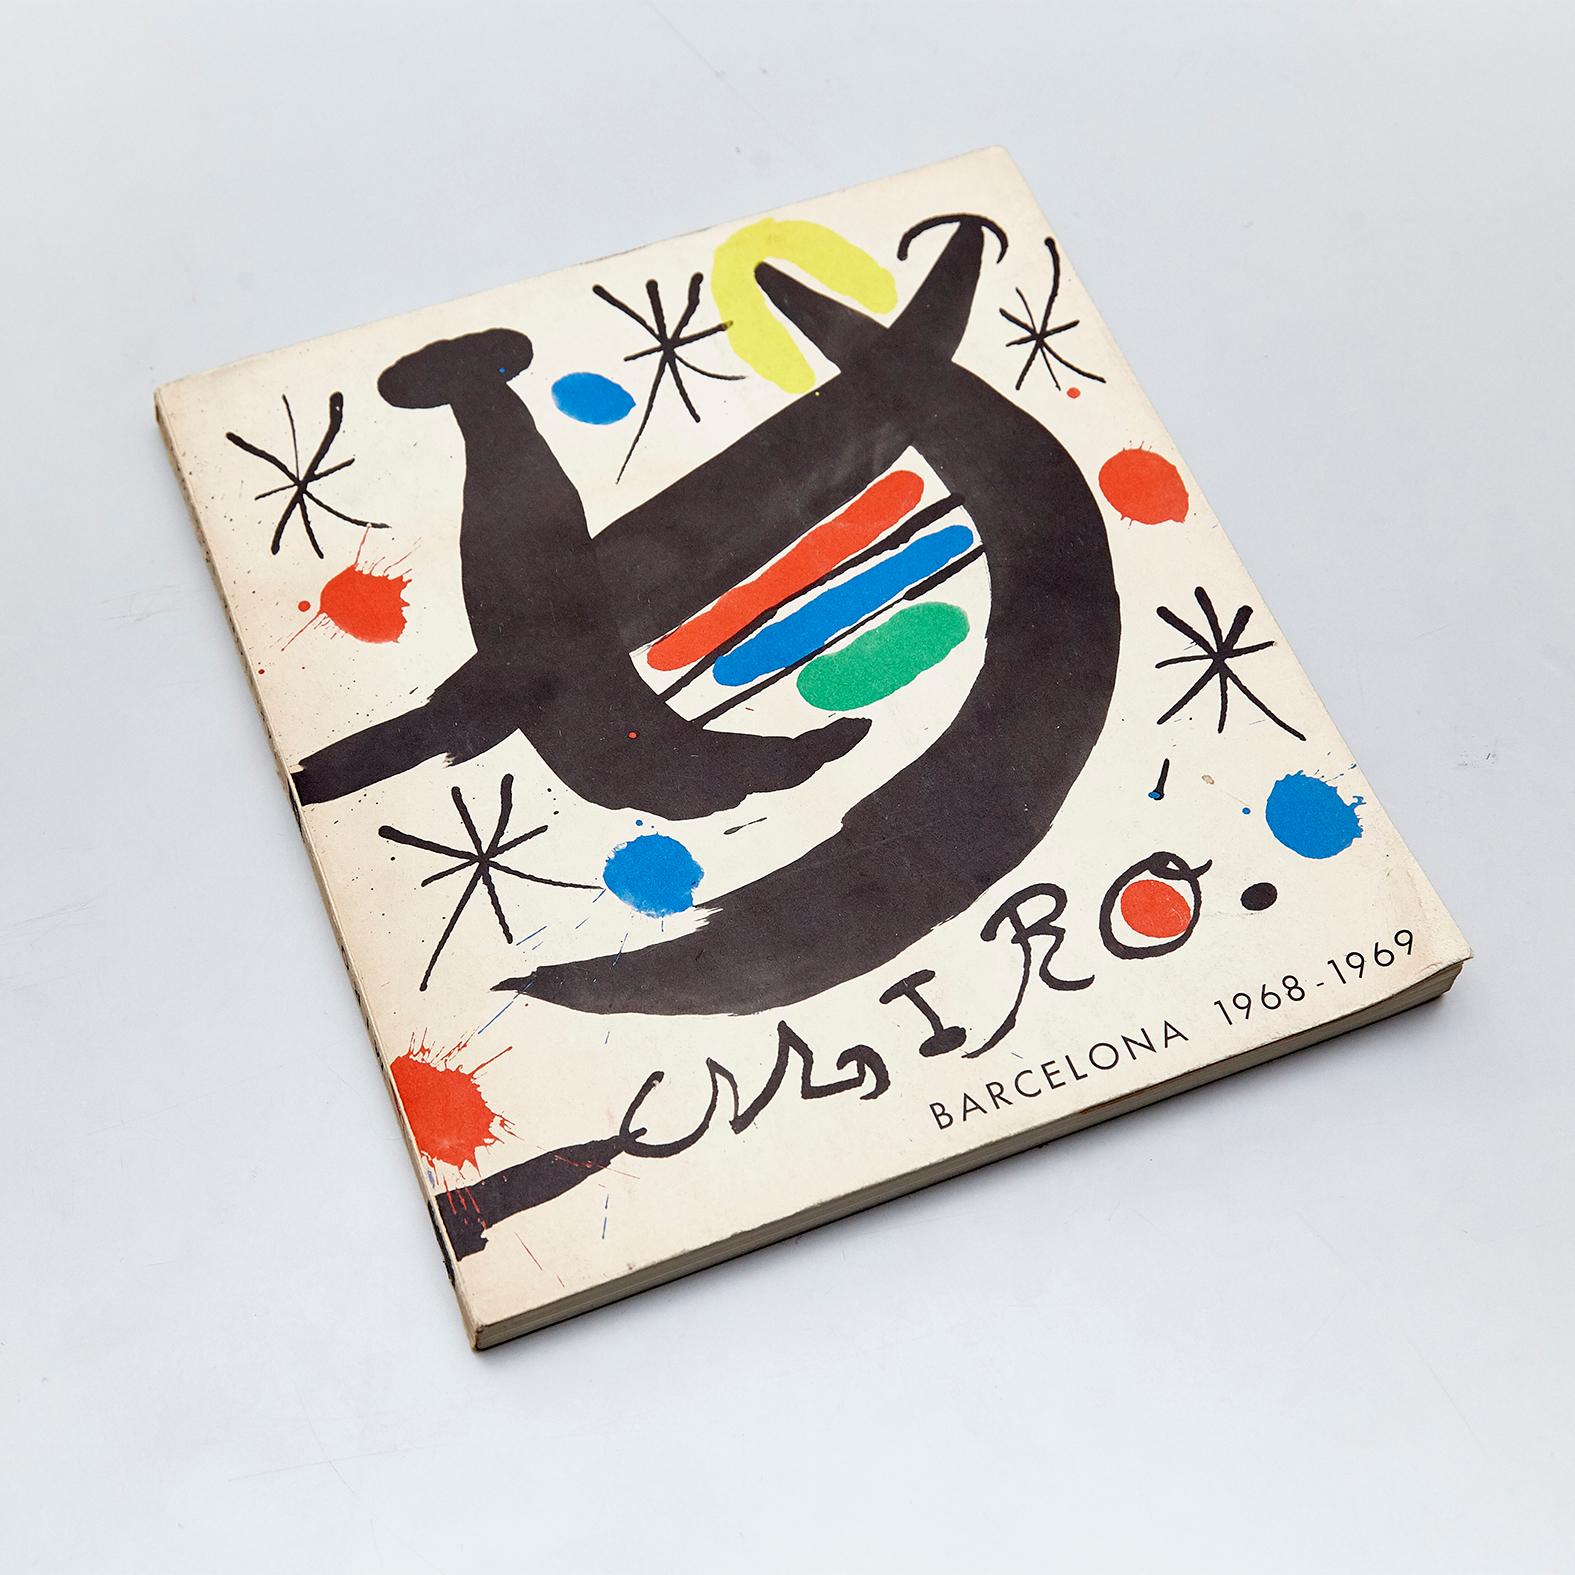 Catalogue of the exhibition 'Miró' of Joan Miró that takes place in Barcelona in 1968-1969.
Published by La Polígrafa in (Spain).

In original condition, with consistent with age and use, preserving a beautiful patina with some scratches.

We offer